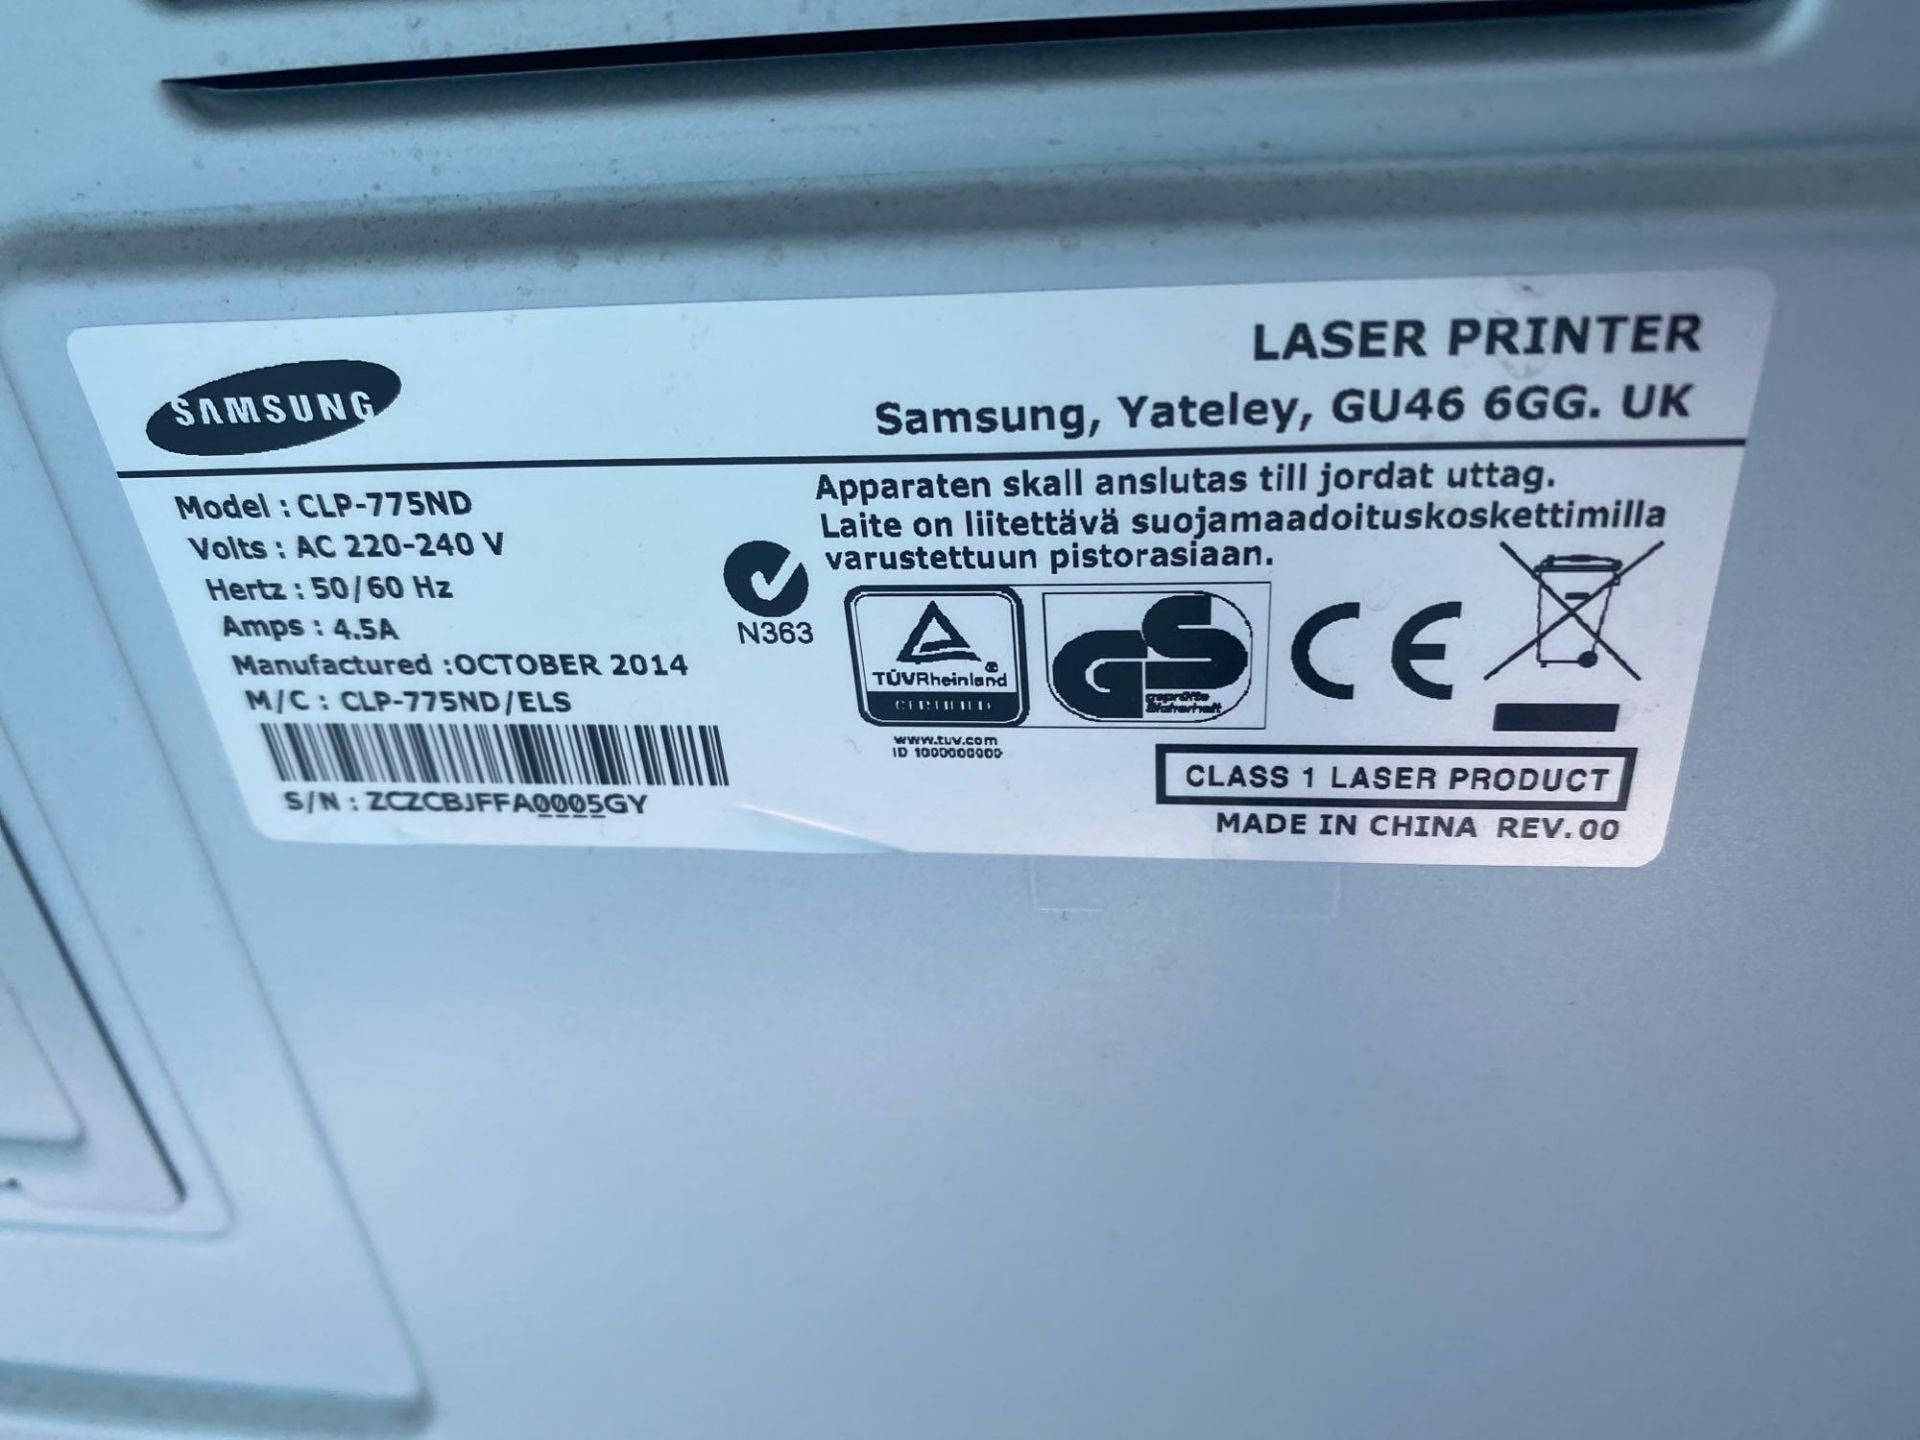 Samsung CLP – 775ND colour printer - Image 4 of 4